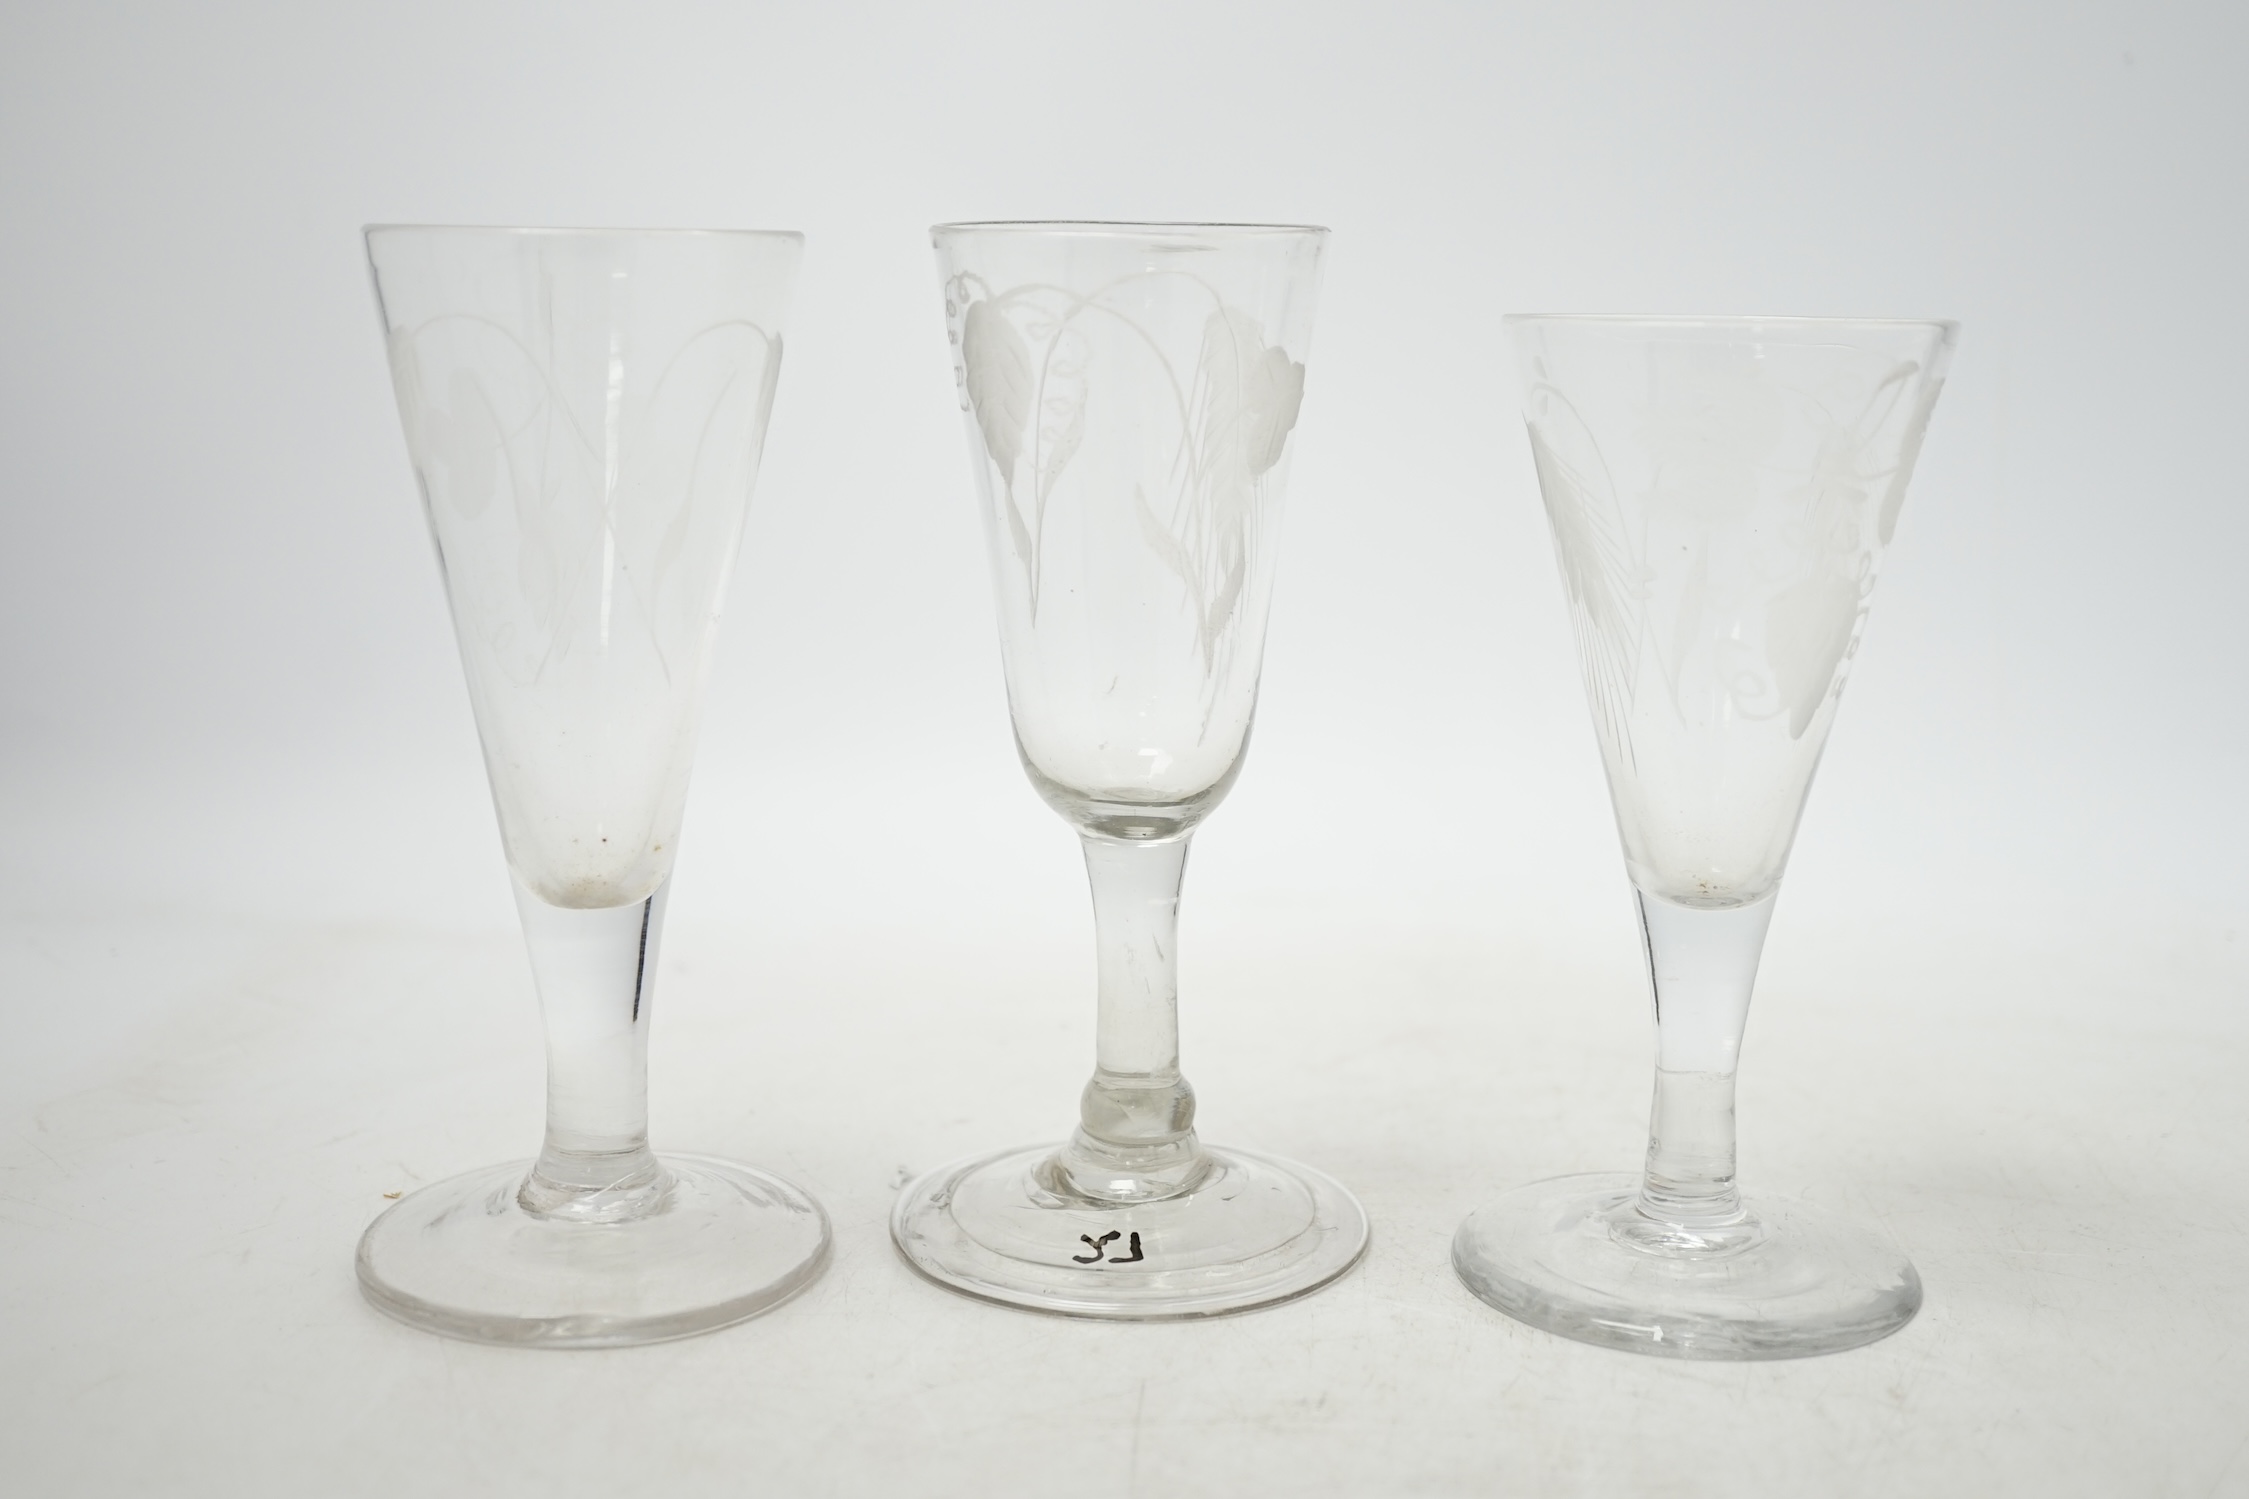 Three mid 18th century engraved ale glasses, all with hop decoration to the bowls, 14cm. Condition - good